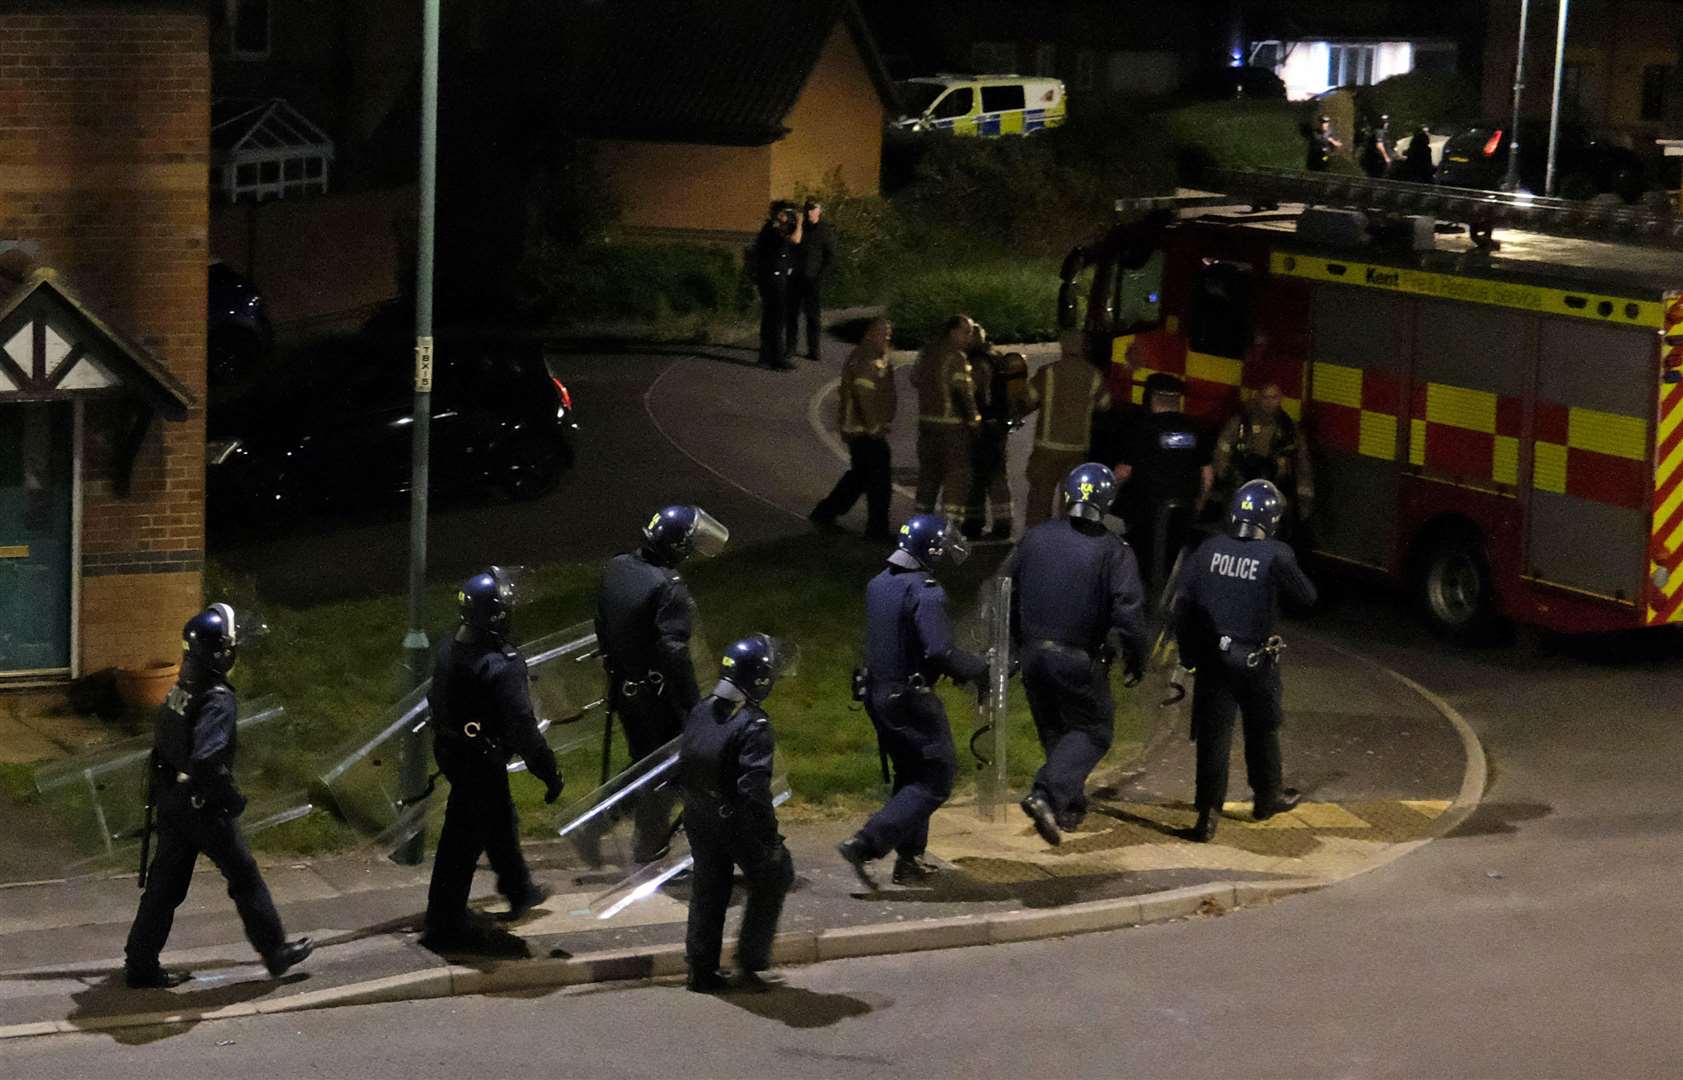 Police in riot gear attend an incident in Burrstock Way, Rainham, on Friday night. Picture: Robin Halls